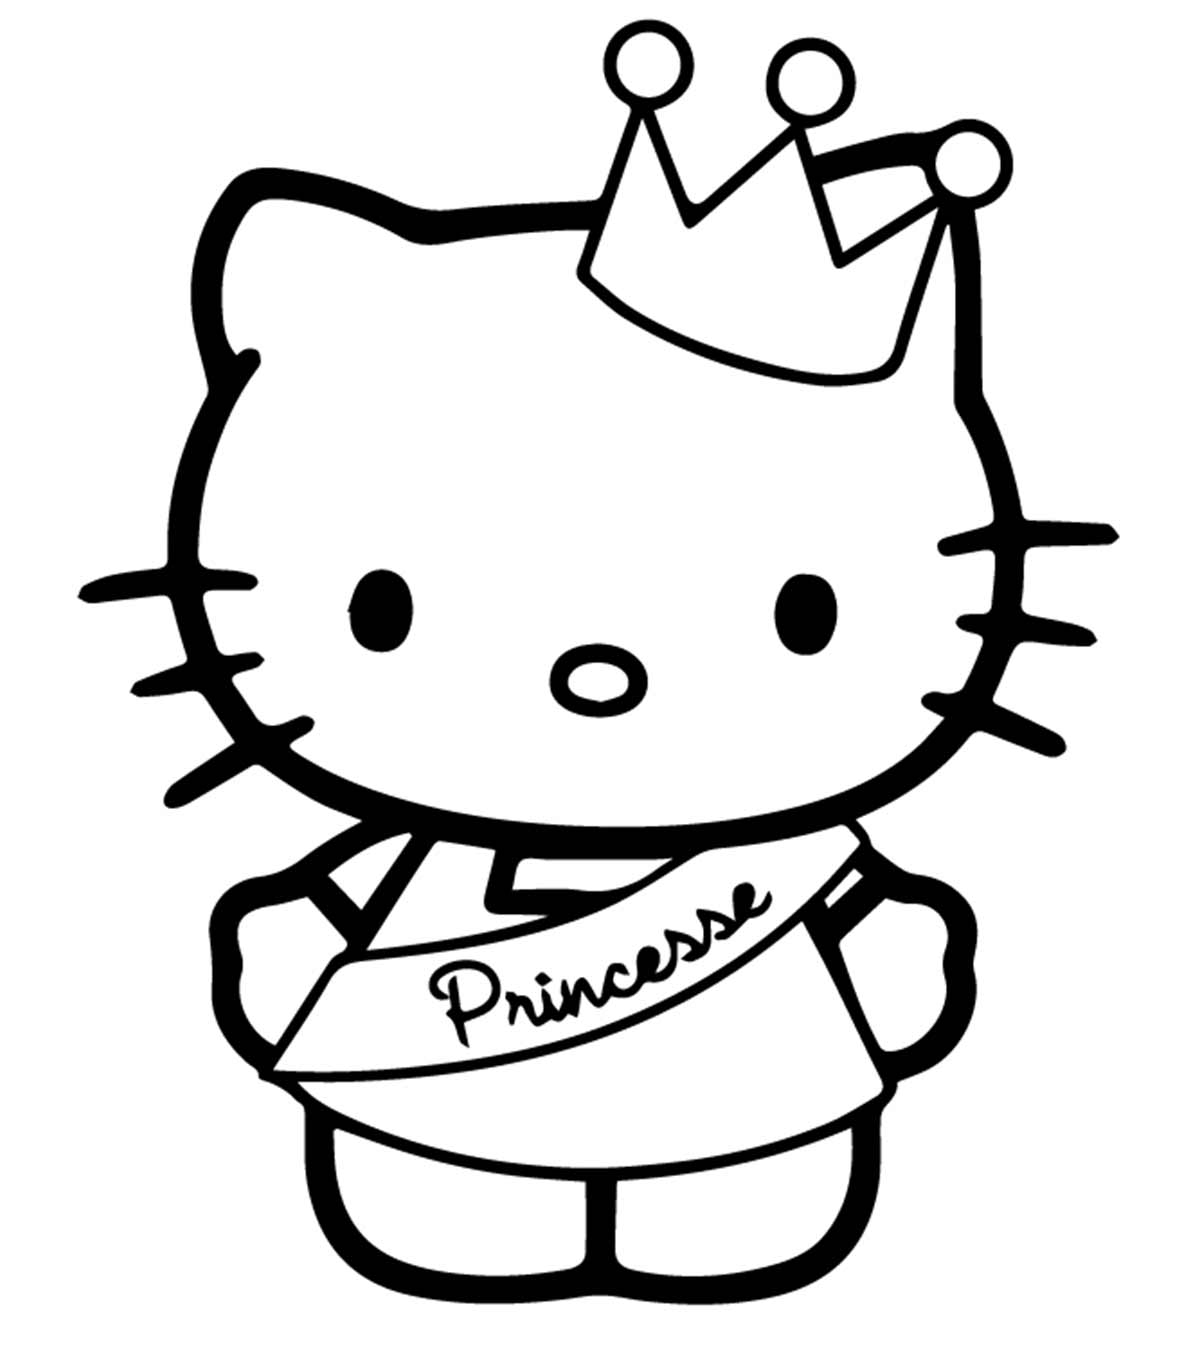 Top 30 Crowns Coloring Pages for Your Little Ones